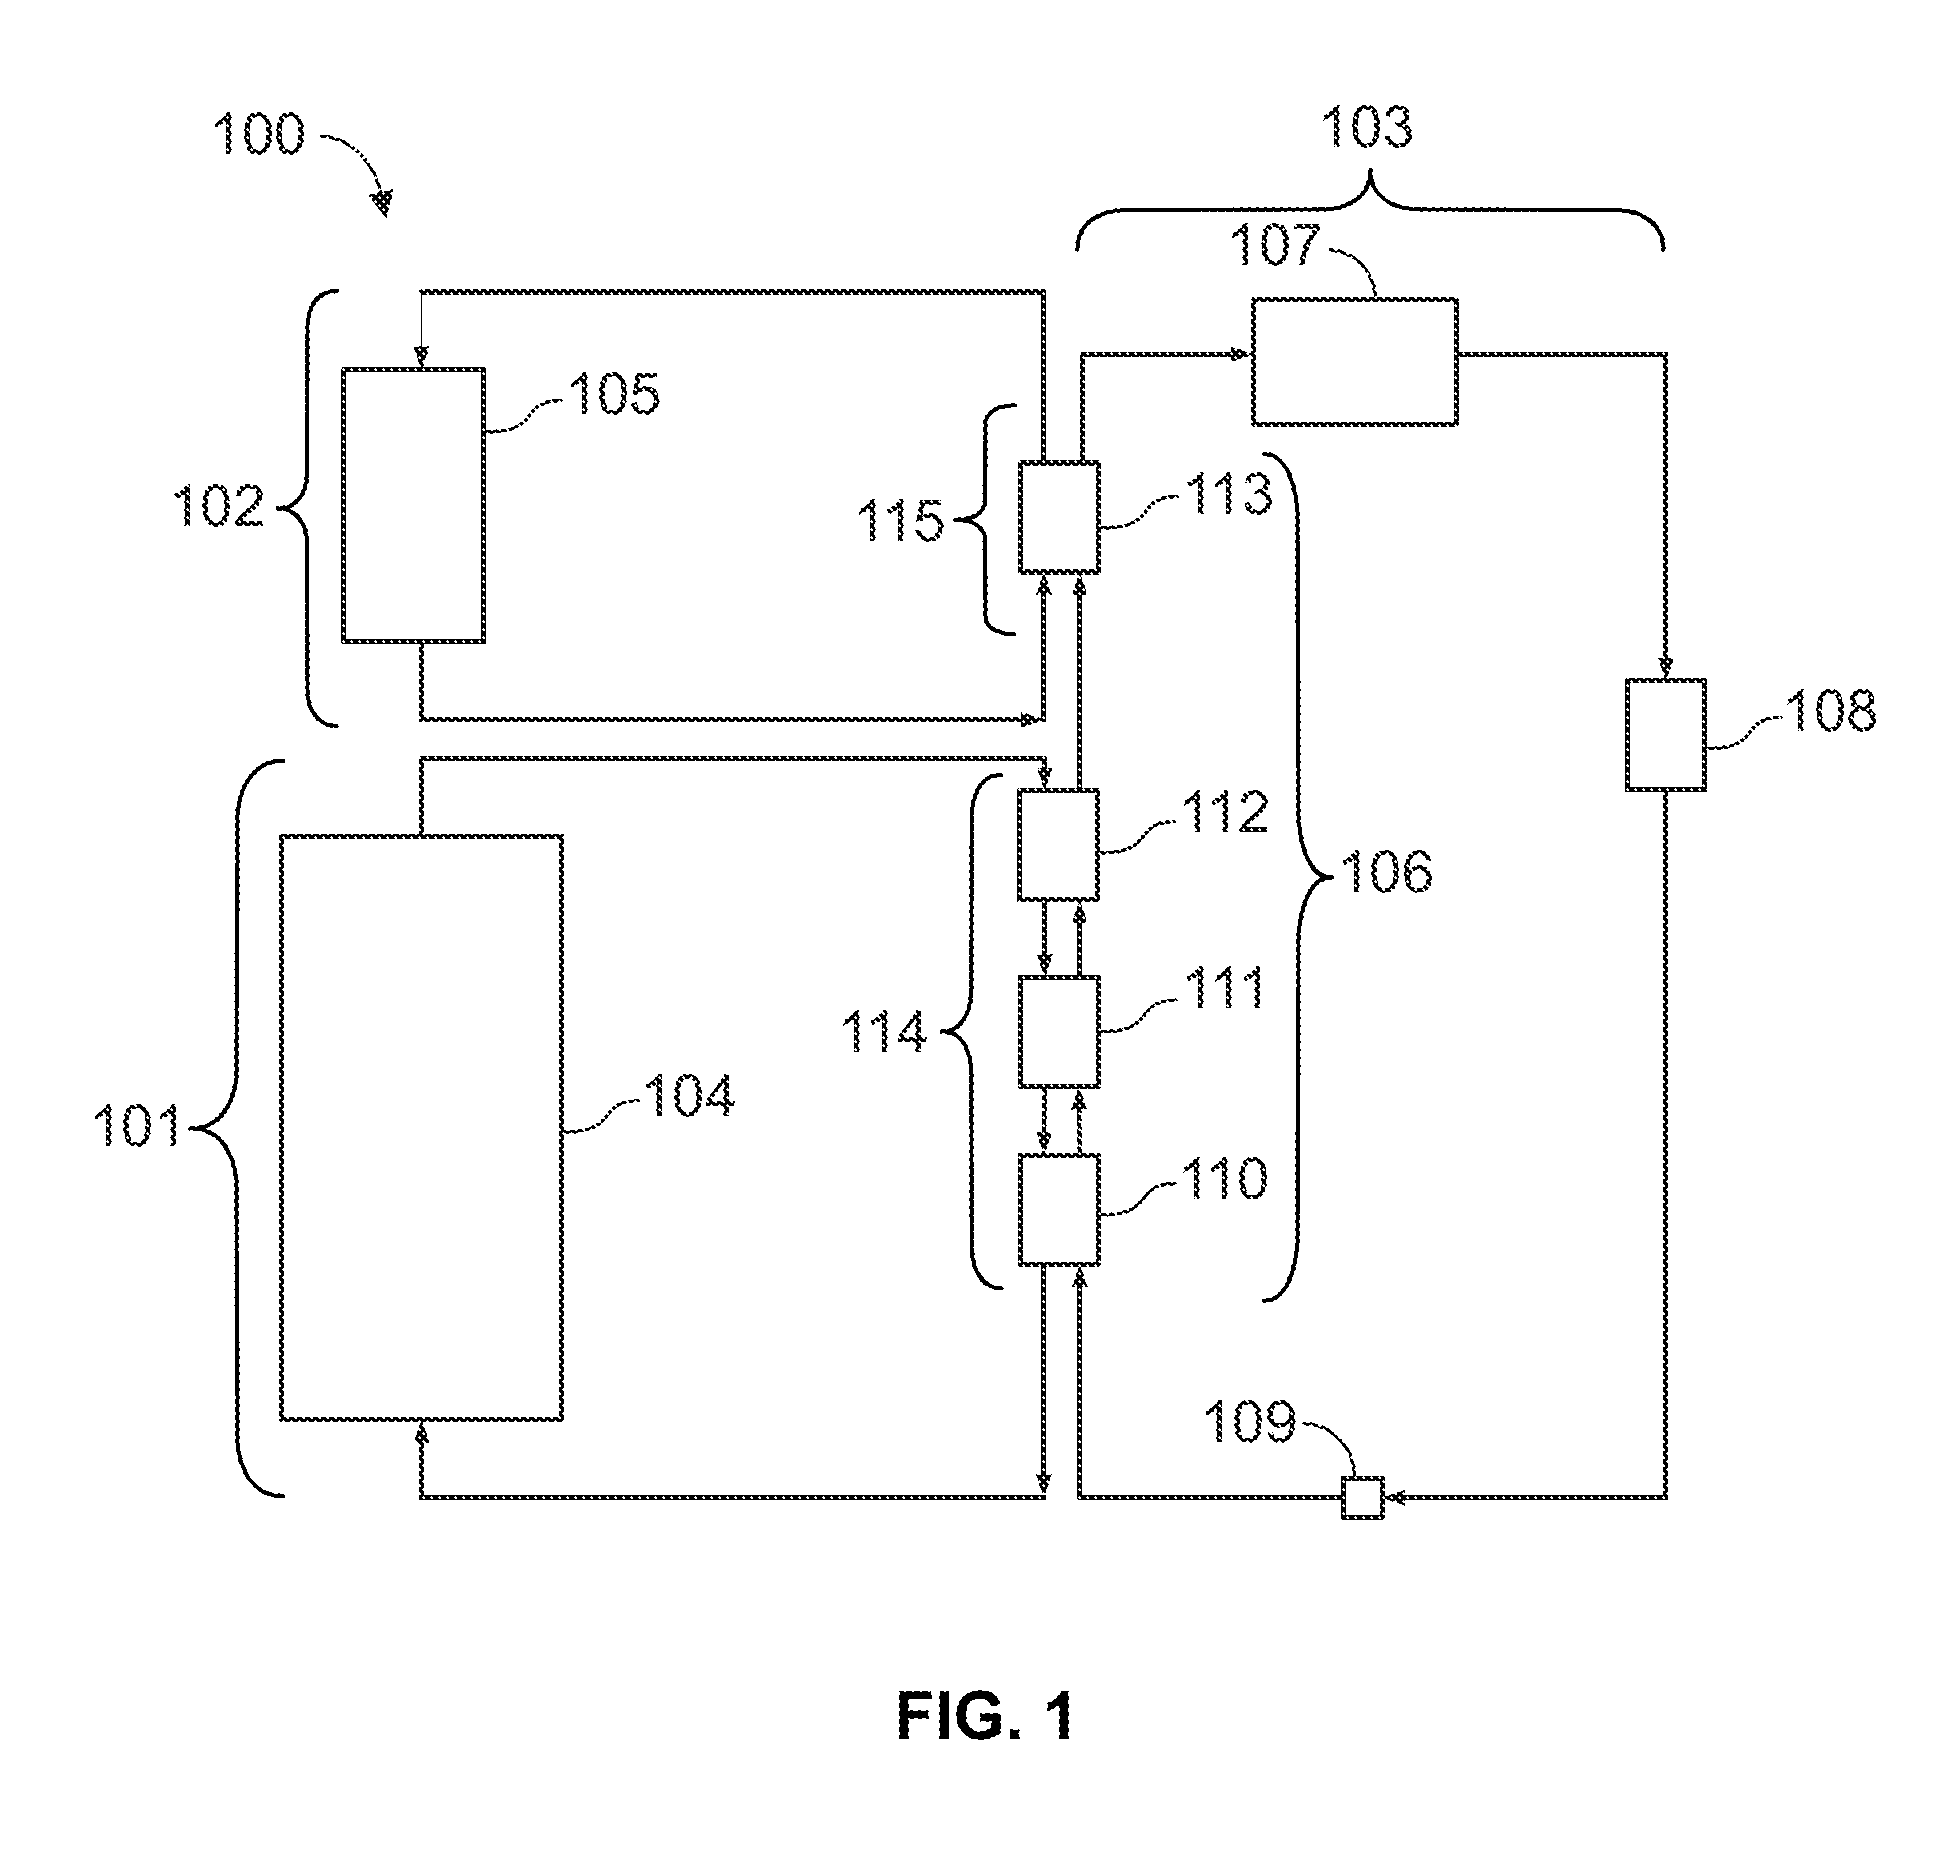 Process for producing superheated steam from a concentrating solar power plant